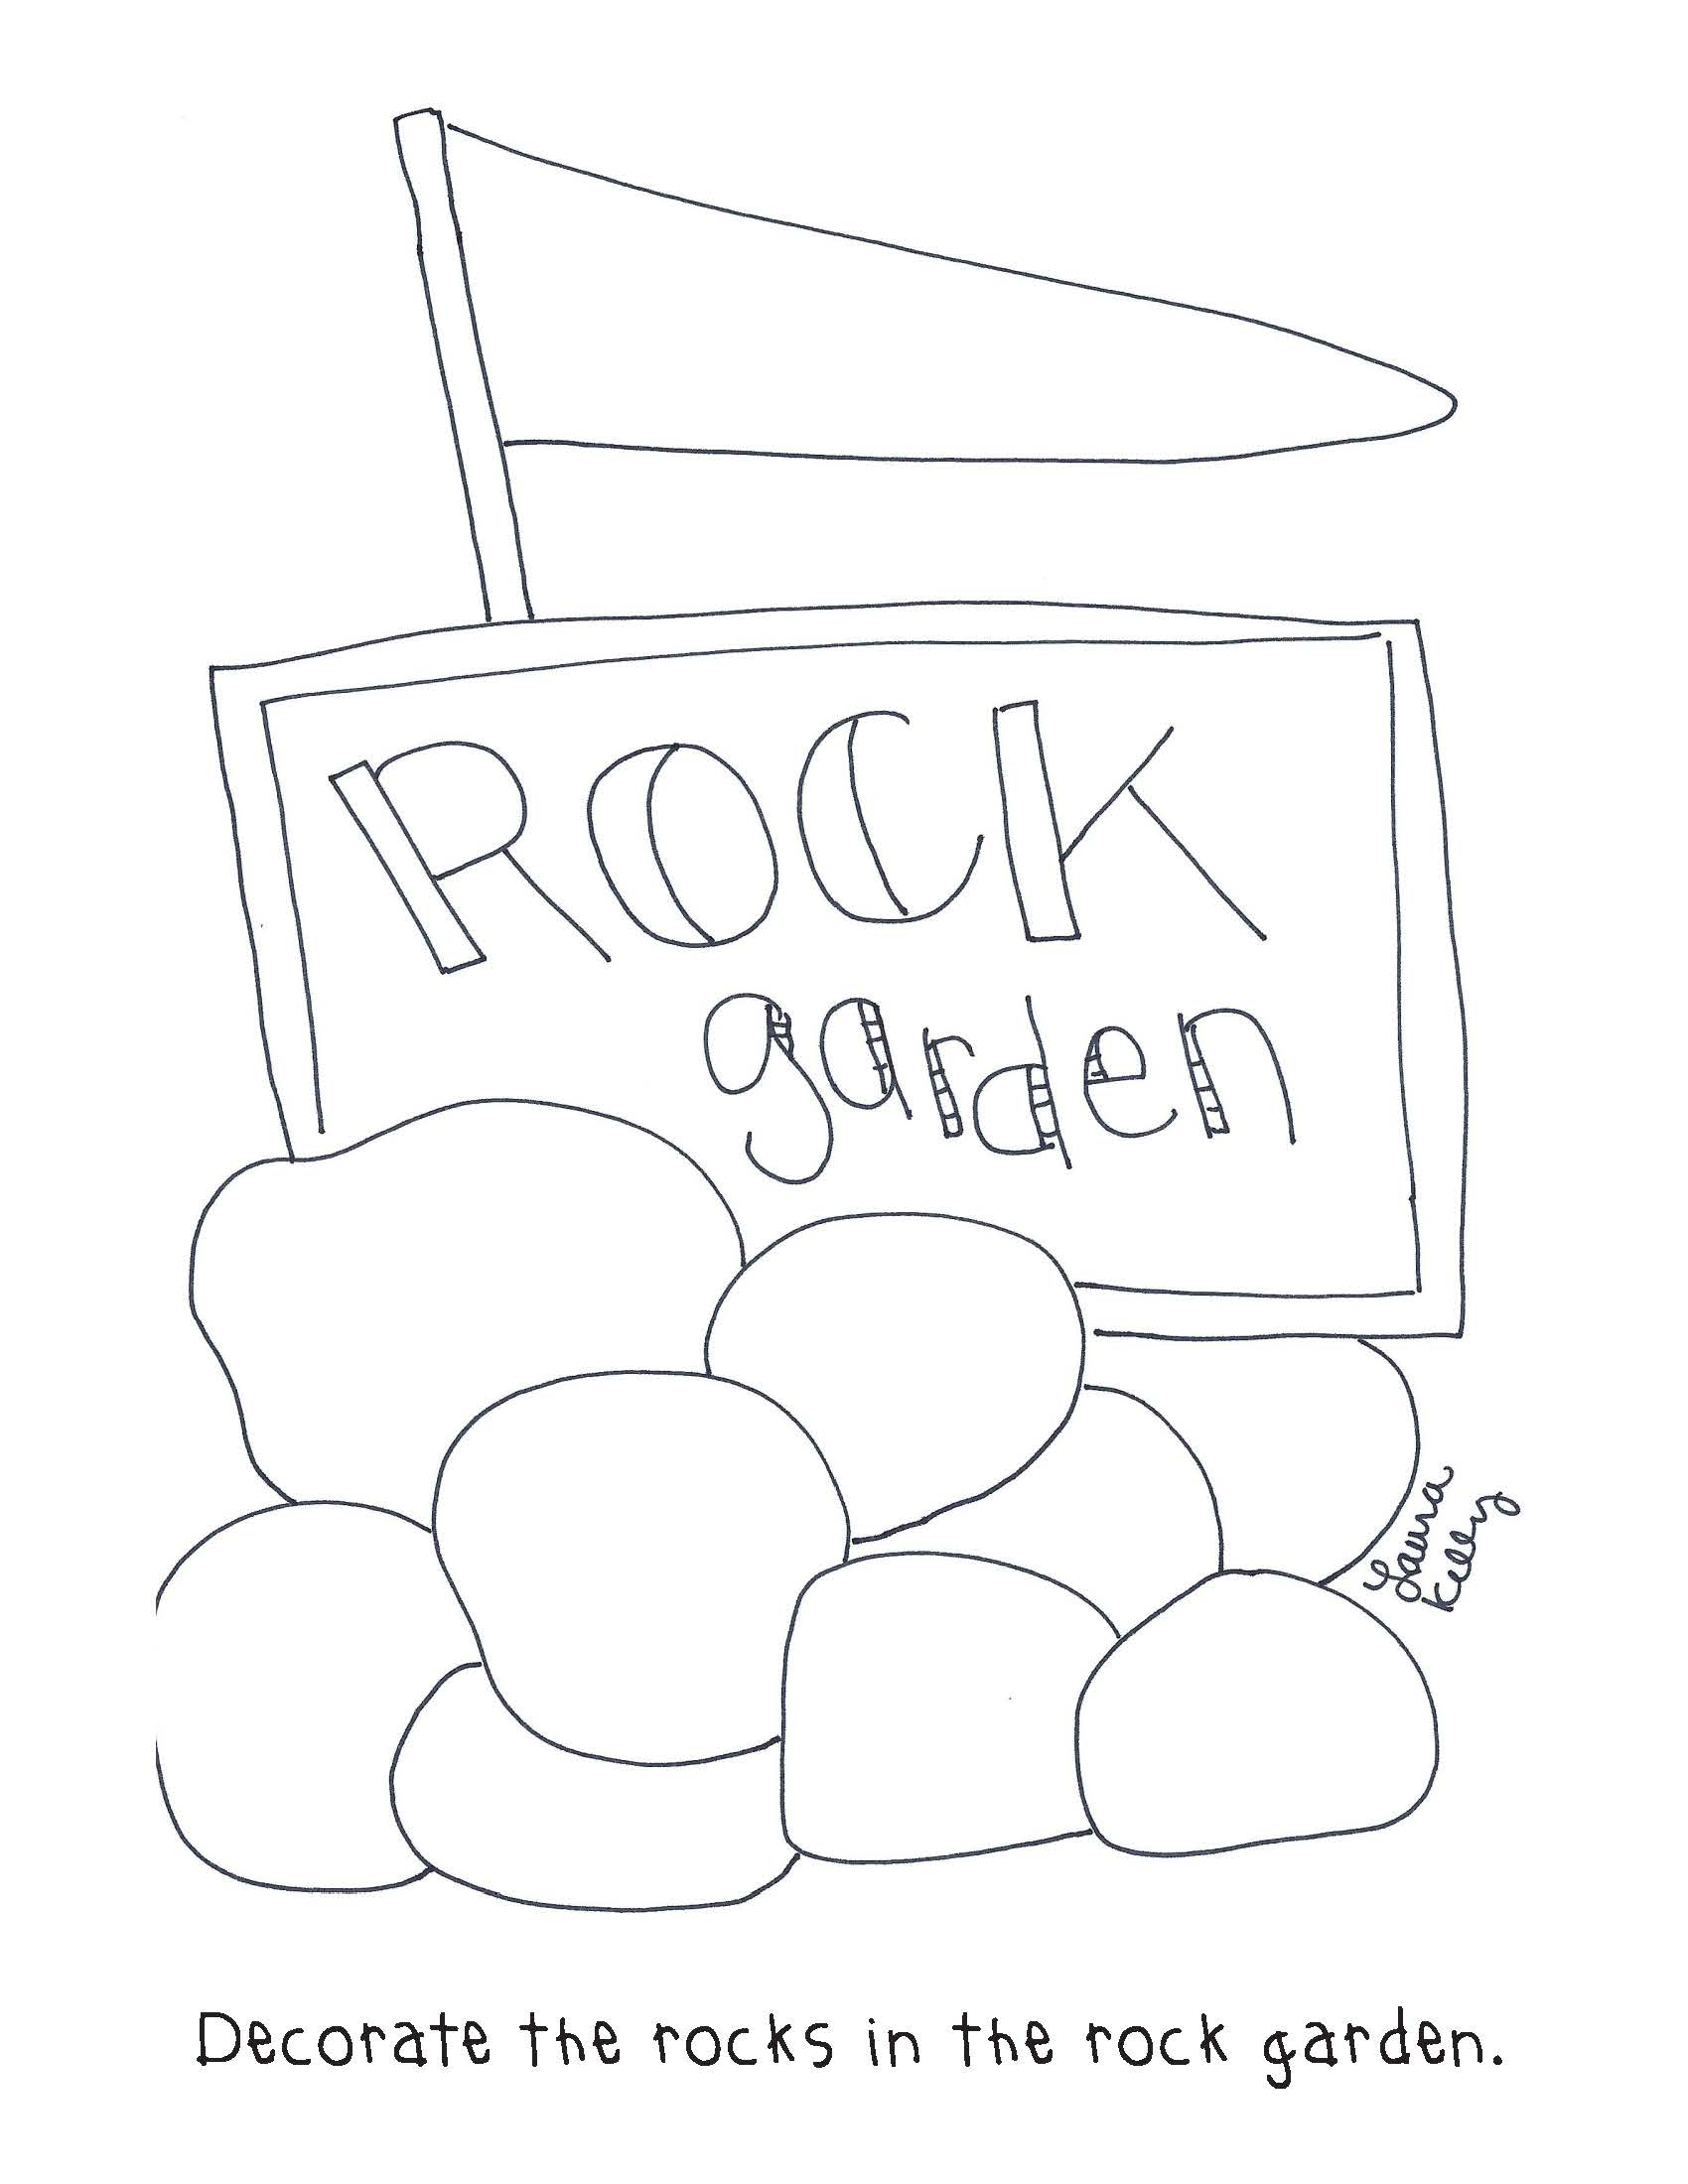 Apex police department on x todays color page is the rock garden you can download this sheet at httpstcorgmmtzsmââapex